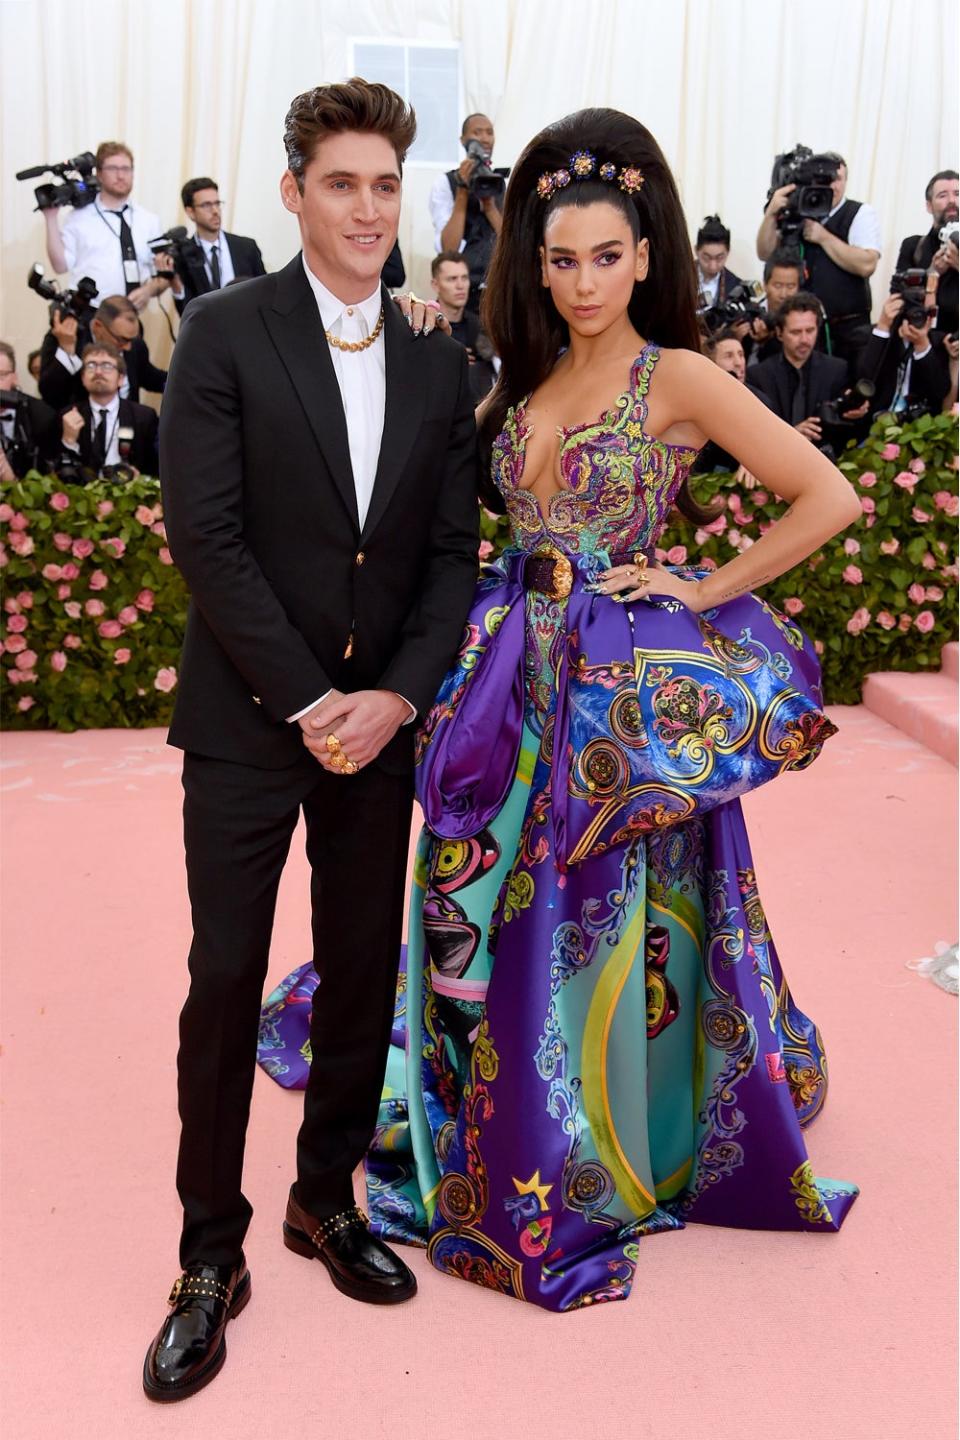 Exes: Lipa and Isaac Carew at the Met Gala (Jamie McCarthy/Getty Images)